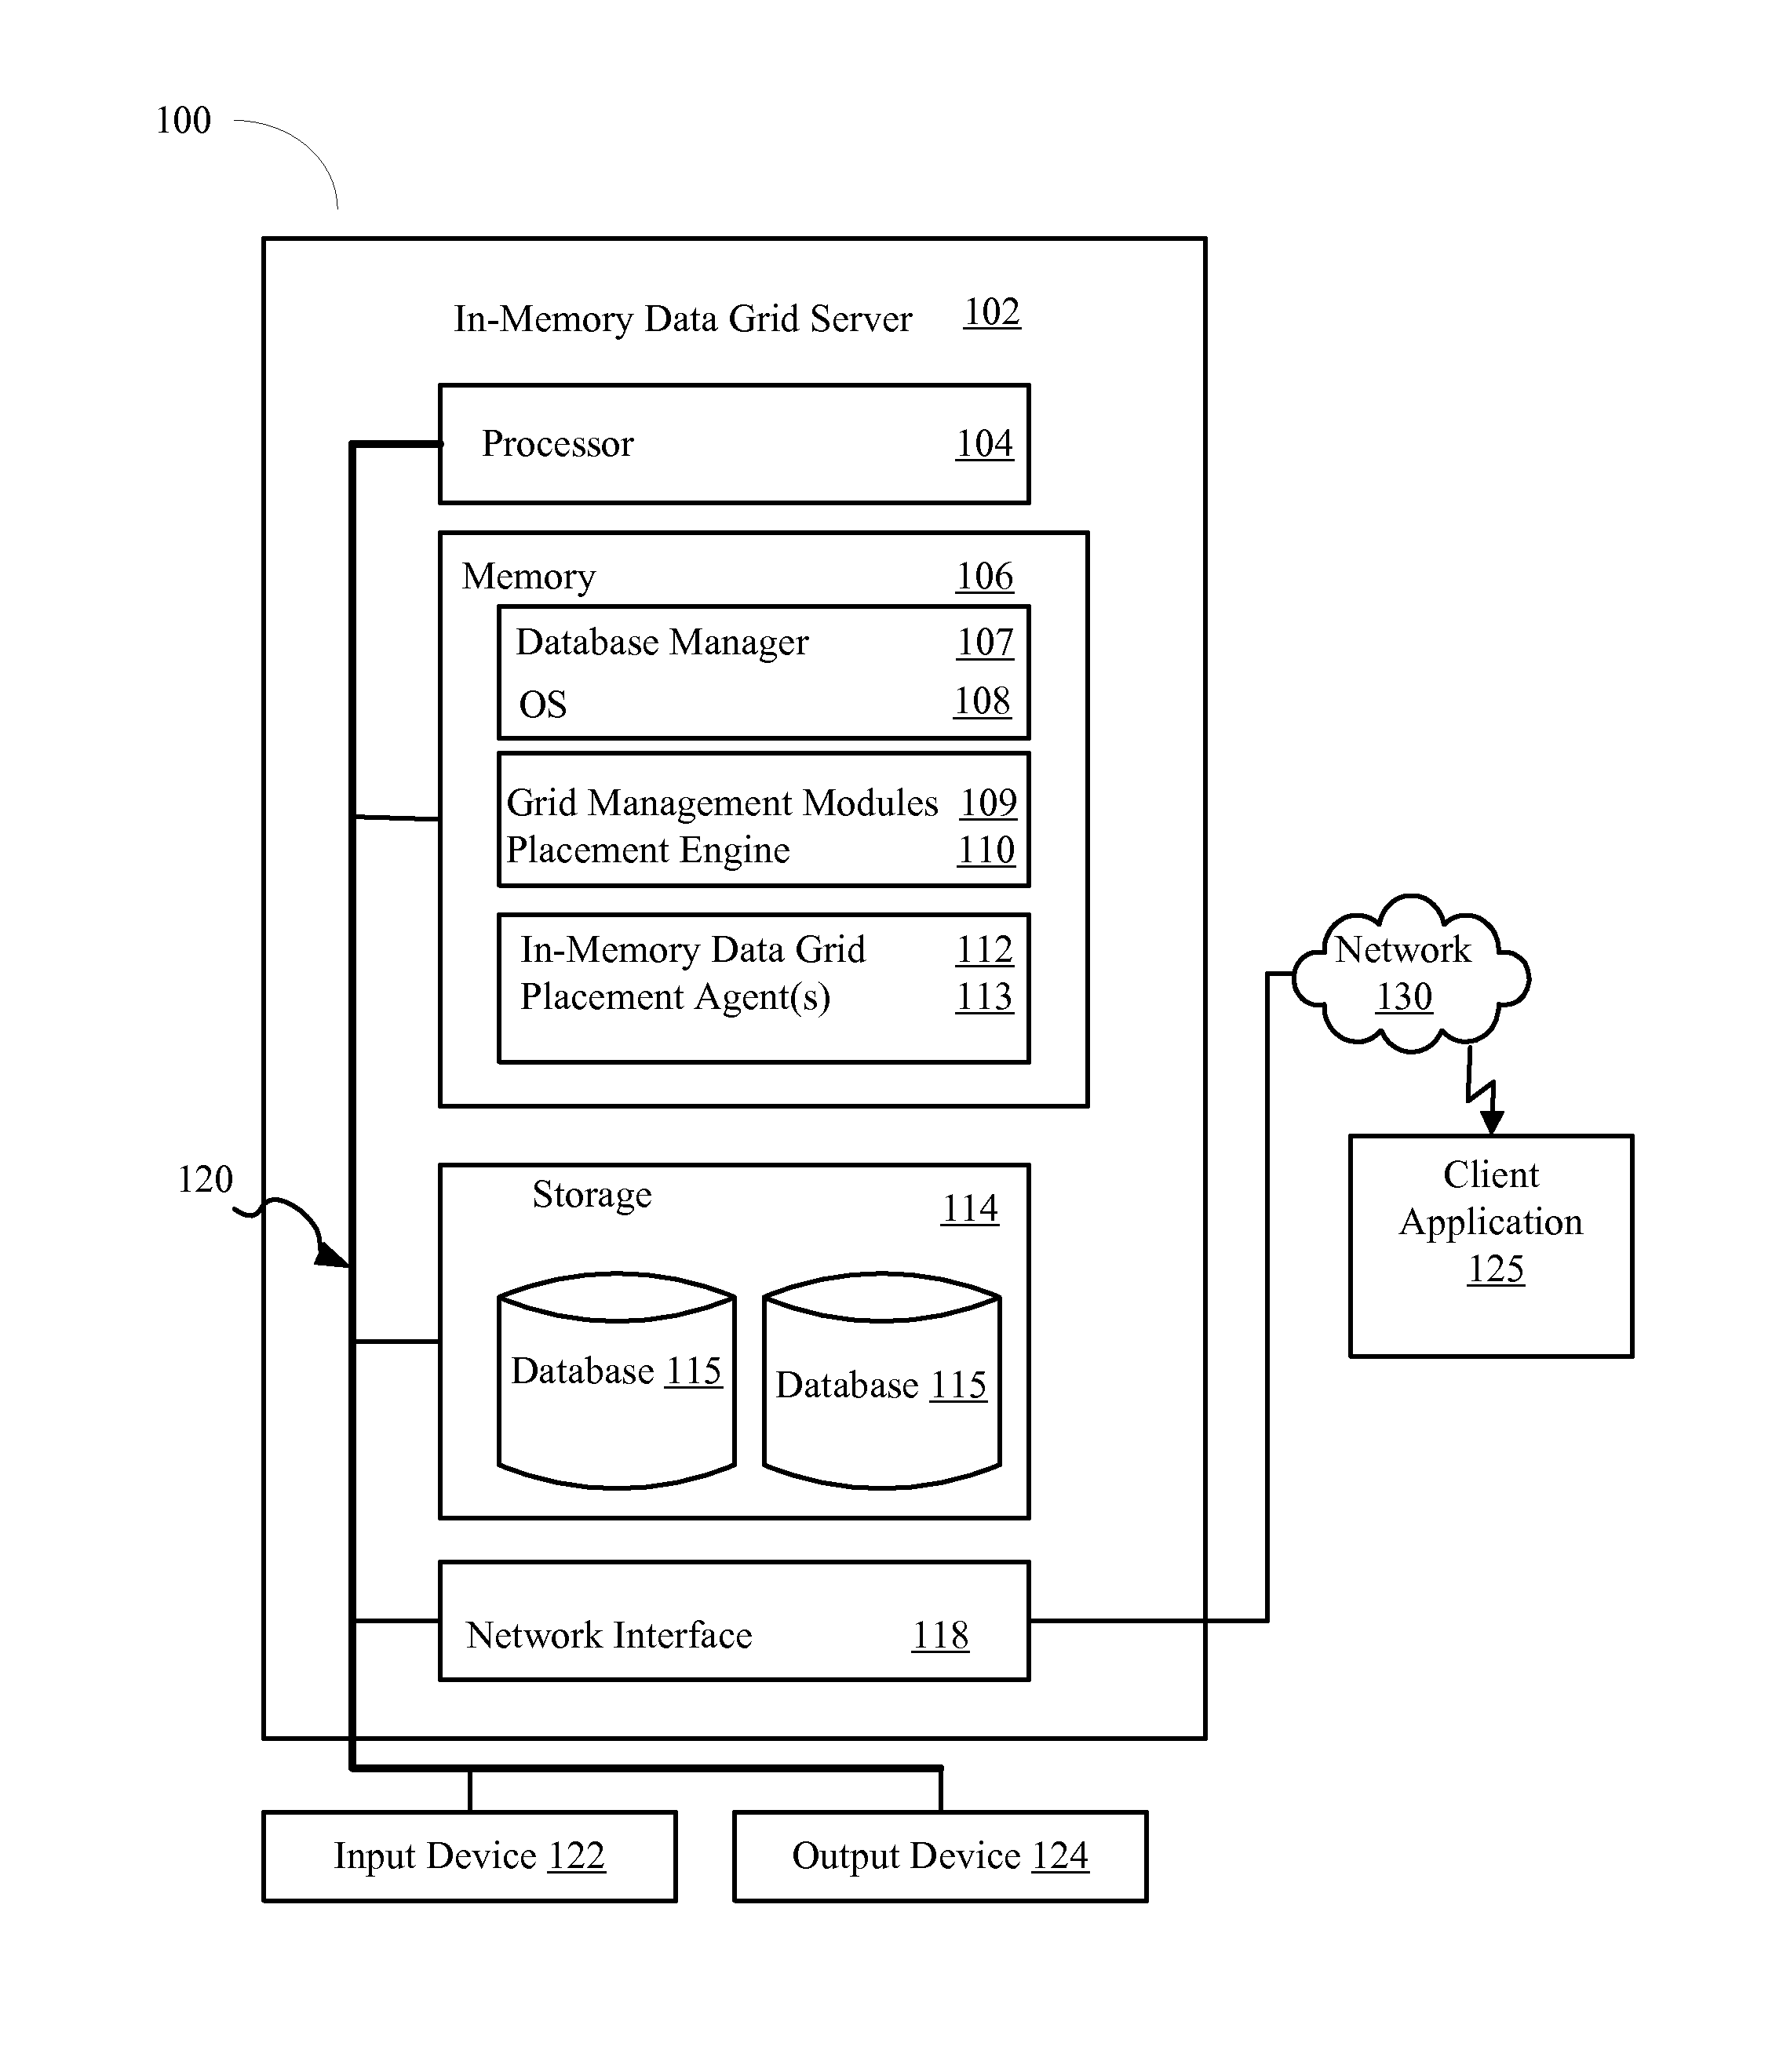 Autonomic data partition placement in an in-memory data grid